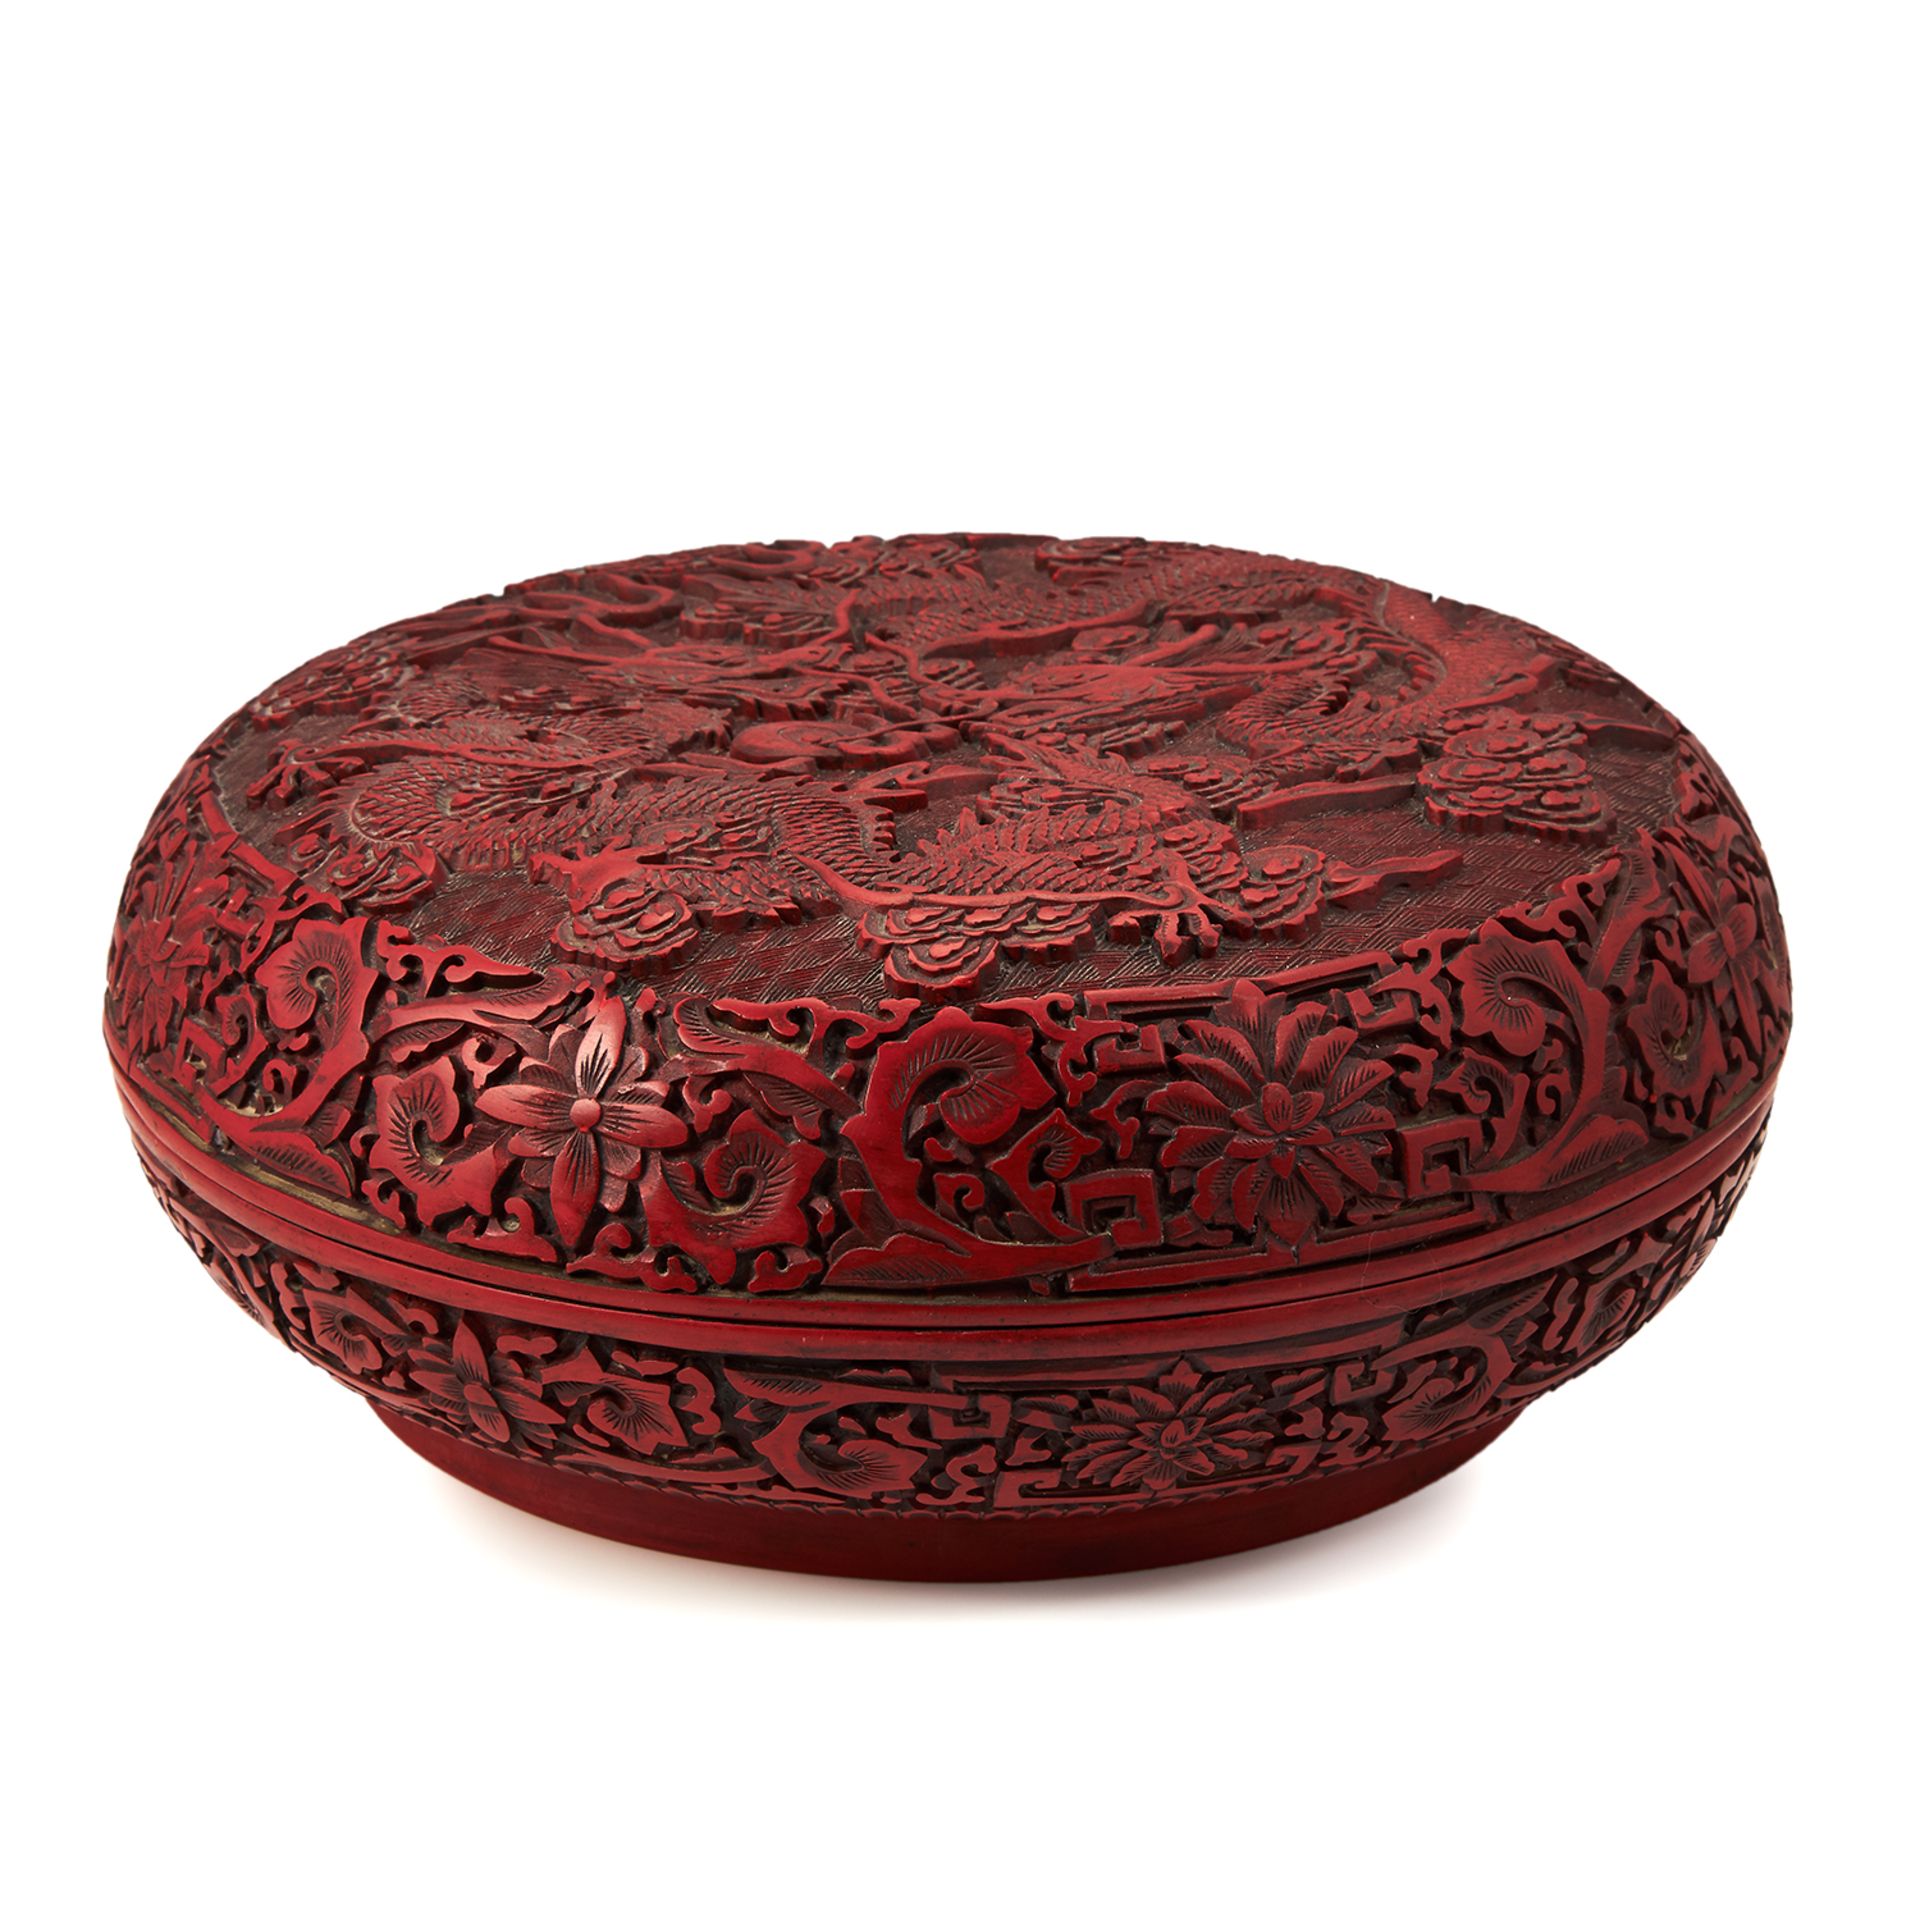 A LARGE CHINESE CARVED CINNABAR BOX of circular form, the lid with detailed carvings of dragons